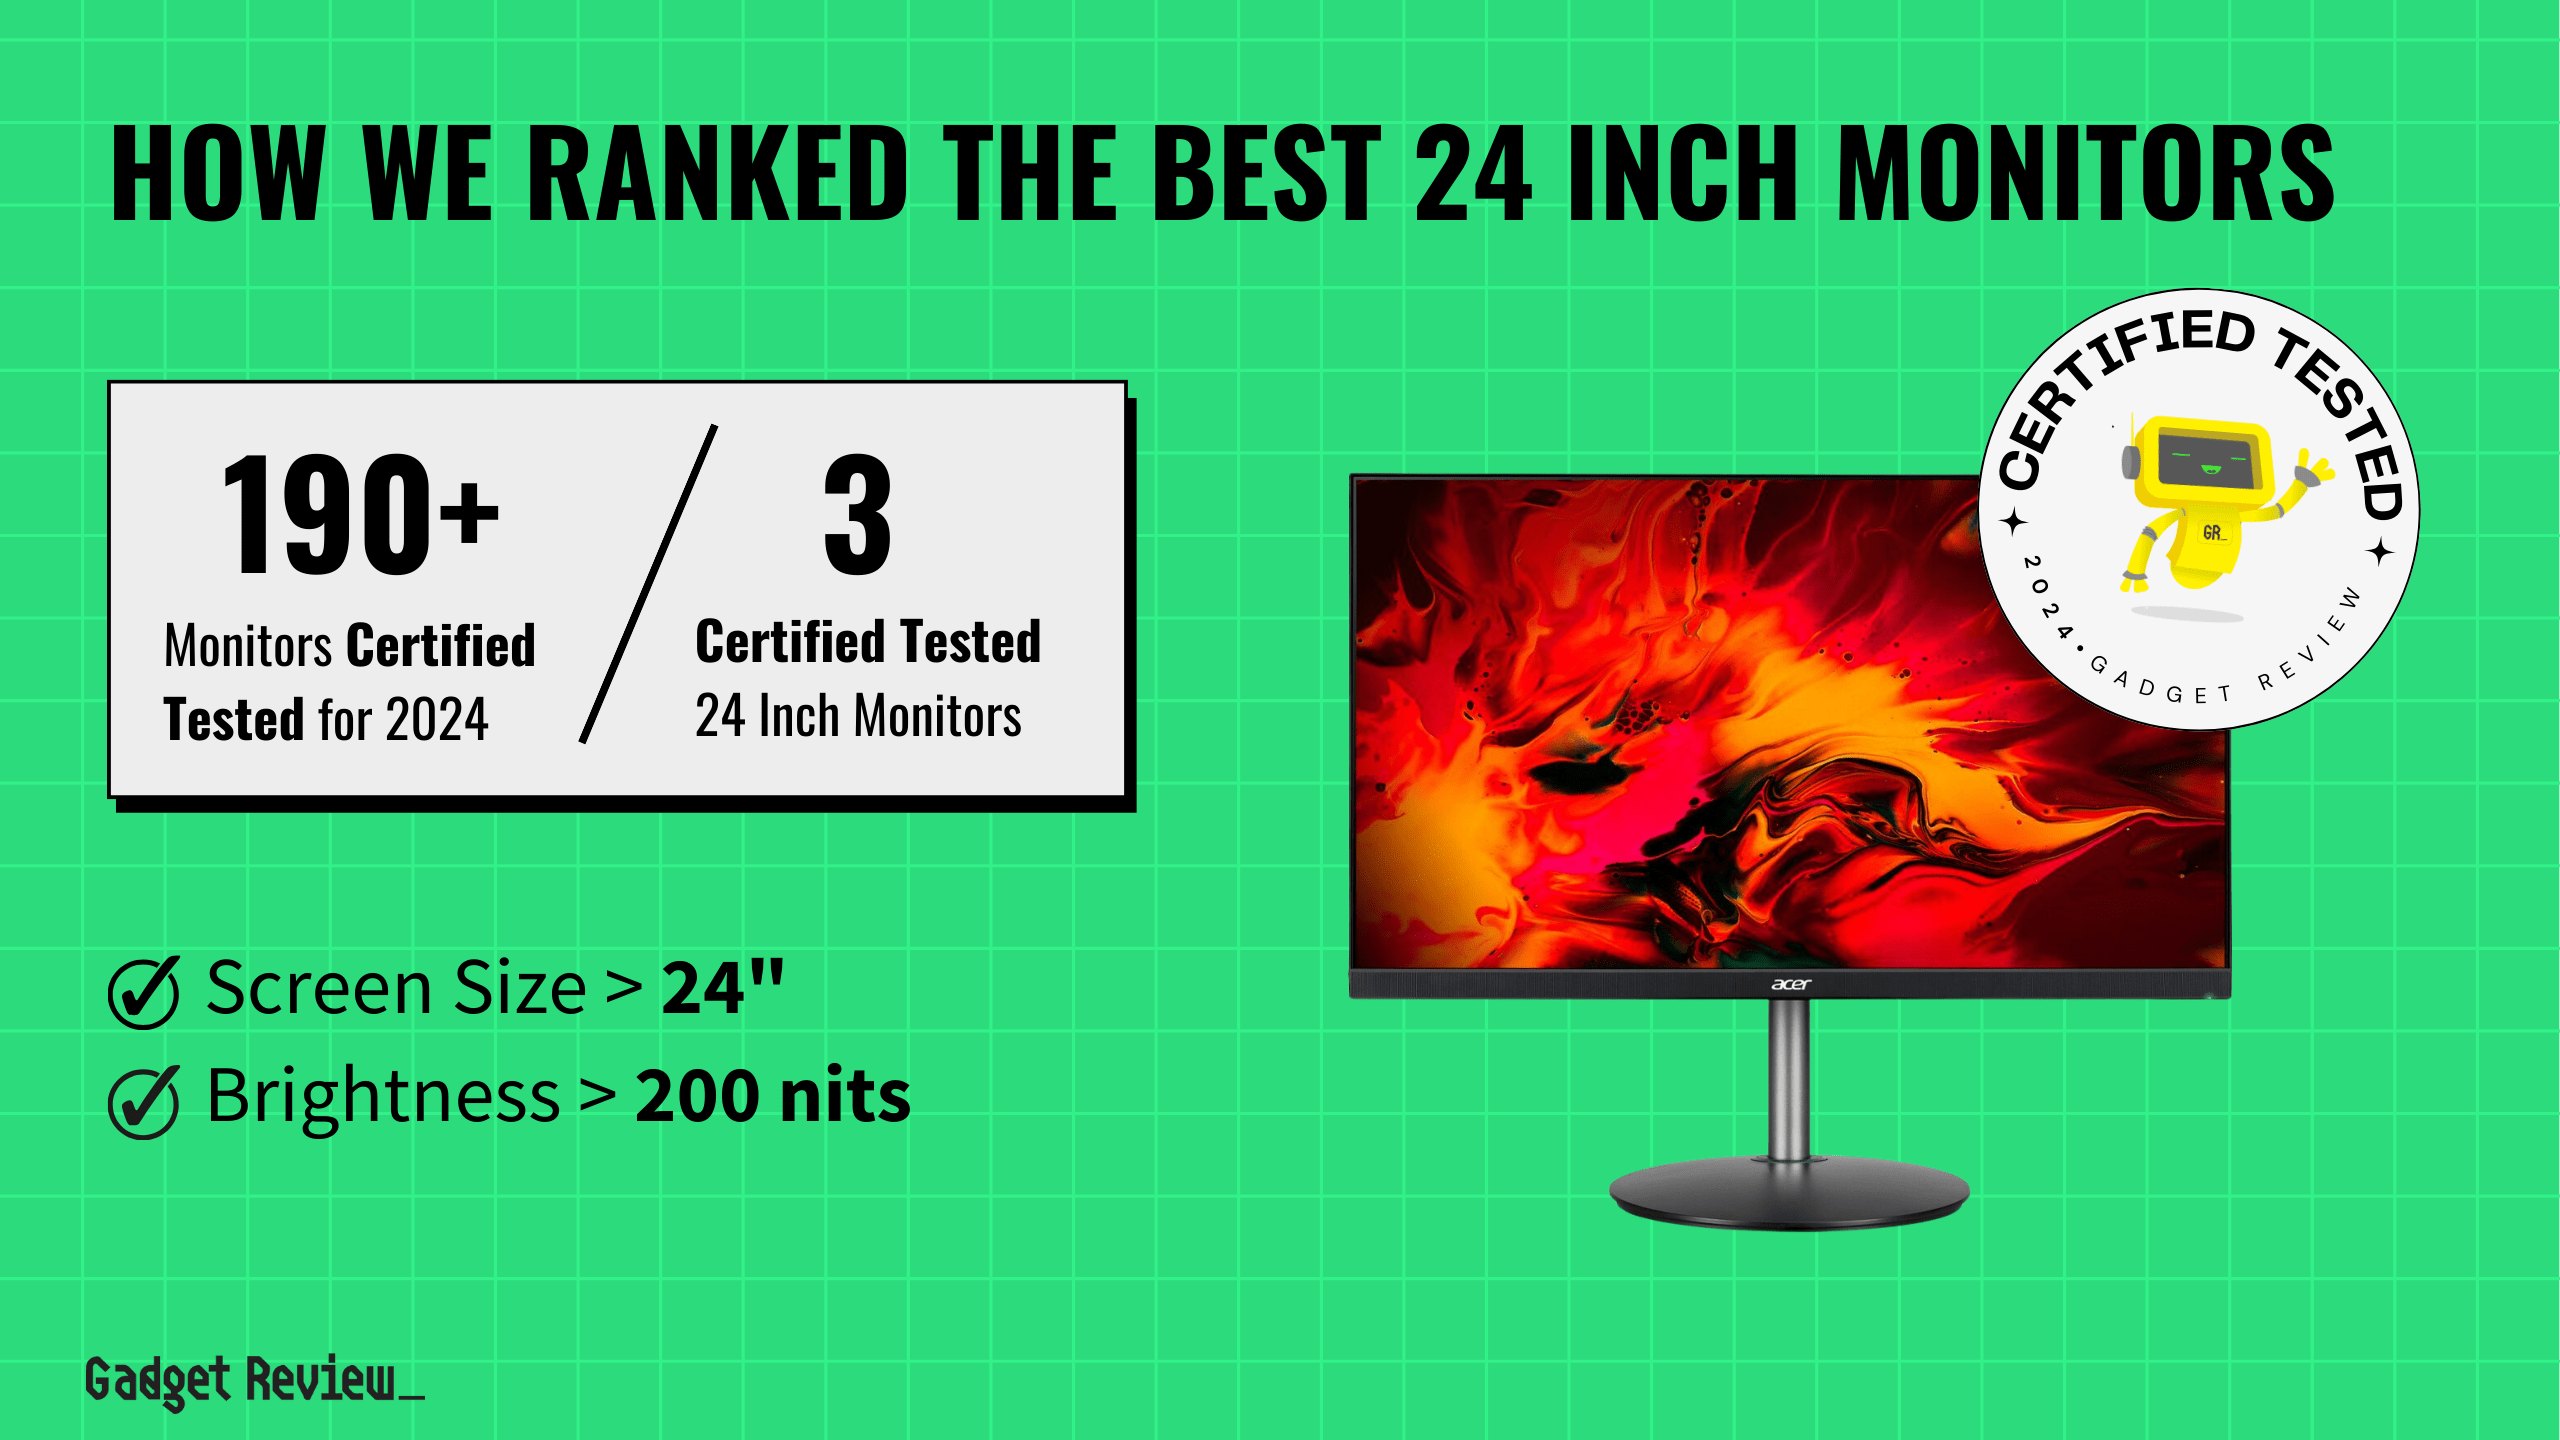 best 24 inch monitor guide that shows the top best computer monitor model